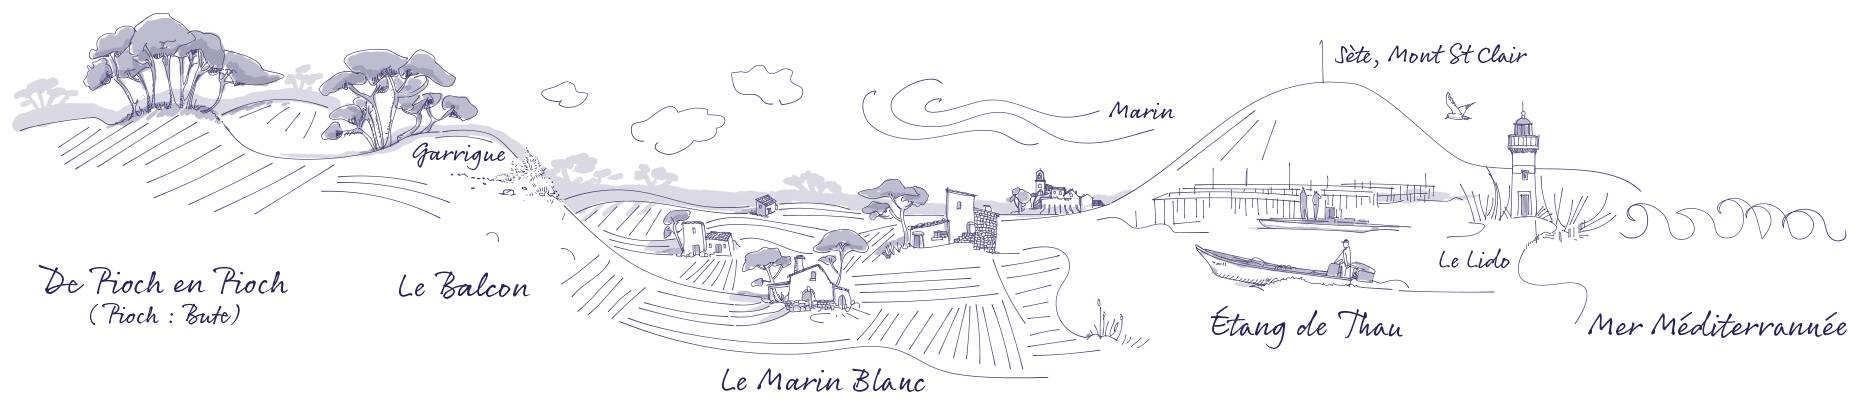 Picpoul Linear Map